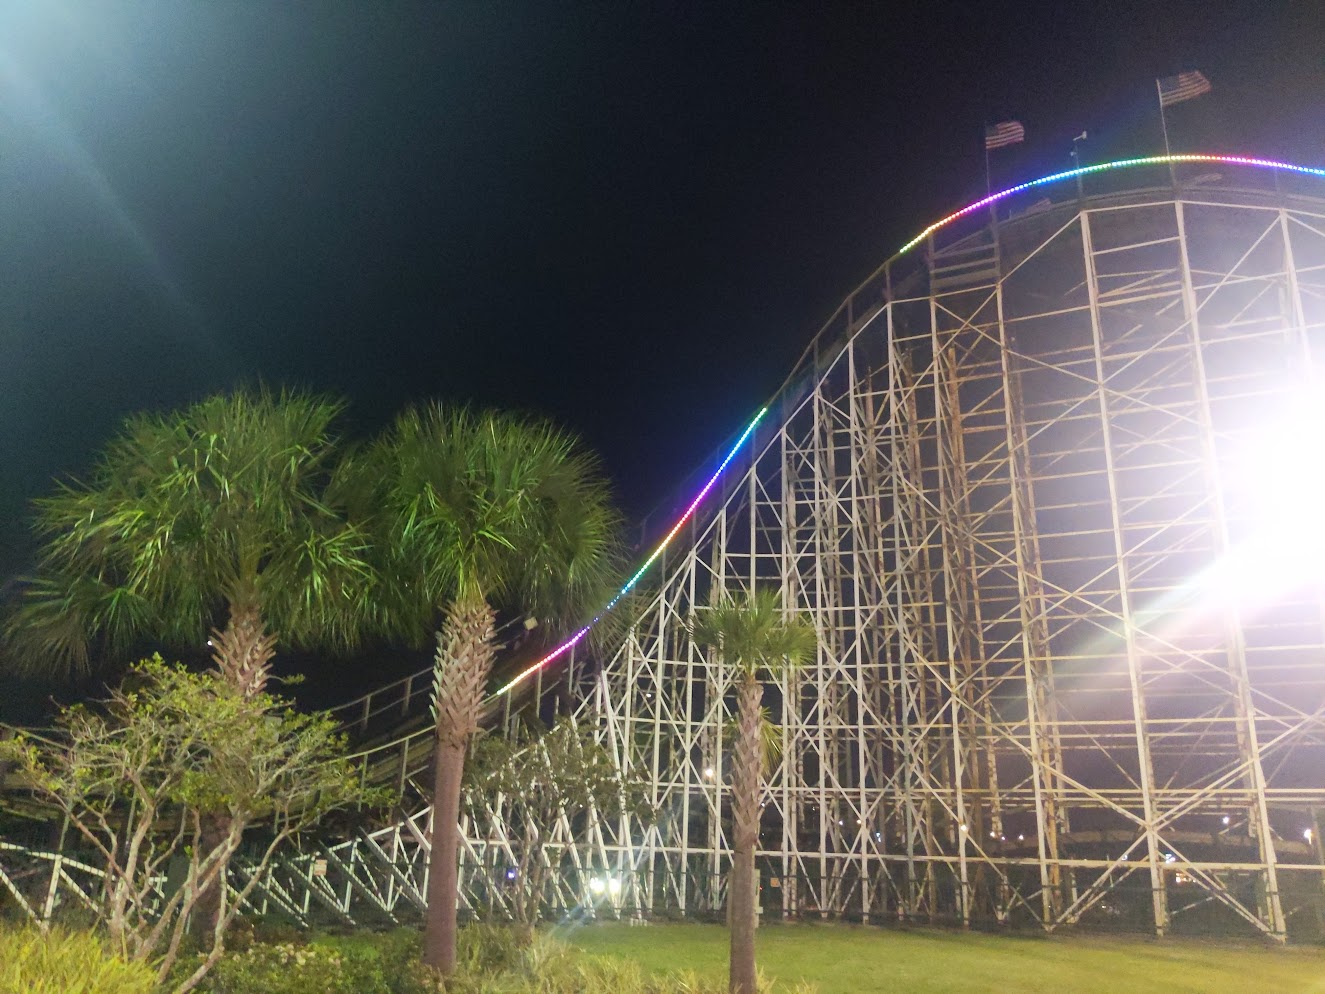 White Lightning's first drop, its lit up with rainbow leds down the railing.